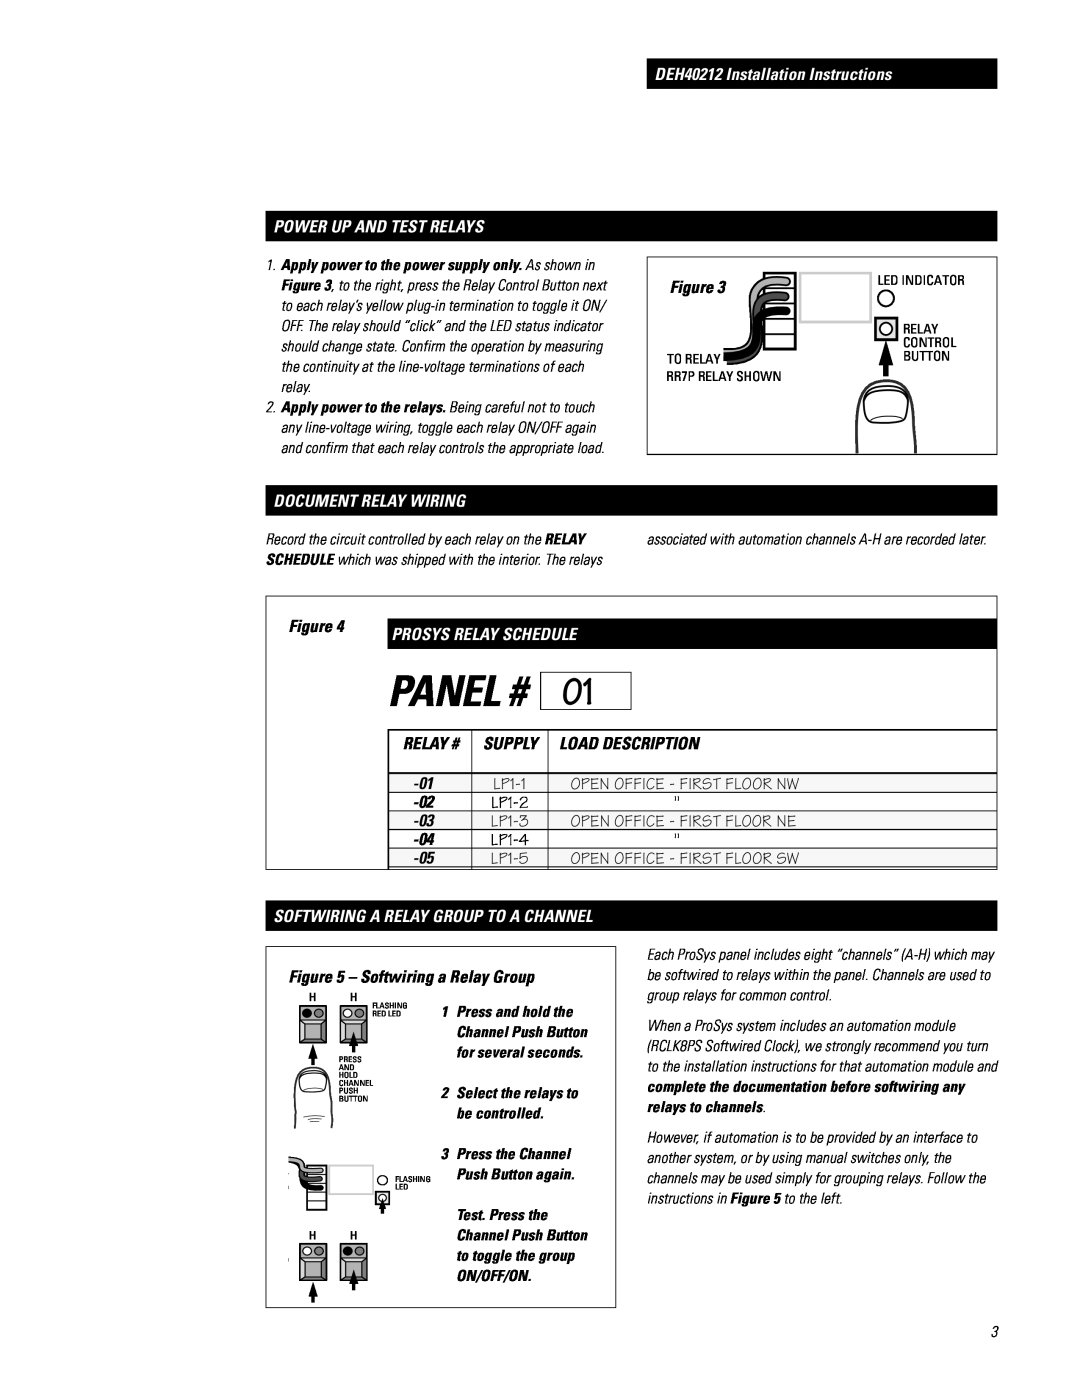 GE RINTERxxxPS(P) Power Up And Test Relays, Document Relay Wiring, Panel #, DEH40212 Installation Instructions 